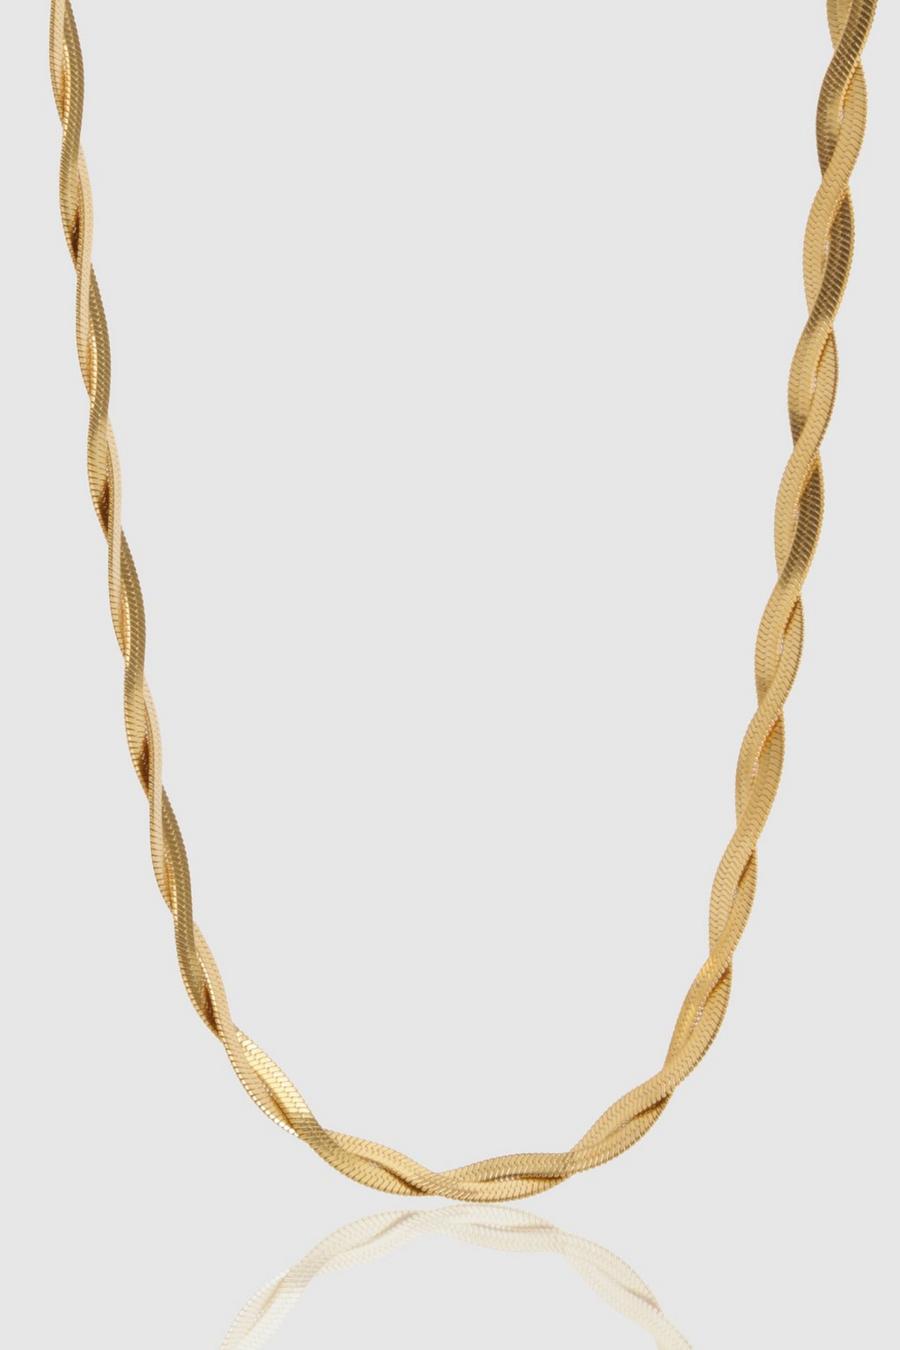 Gold Stainless Steel Twisted Snake Chain Necklace 